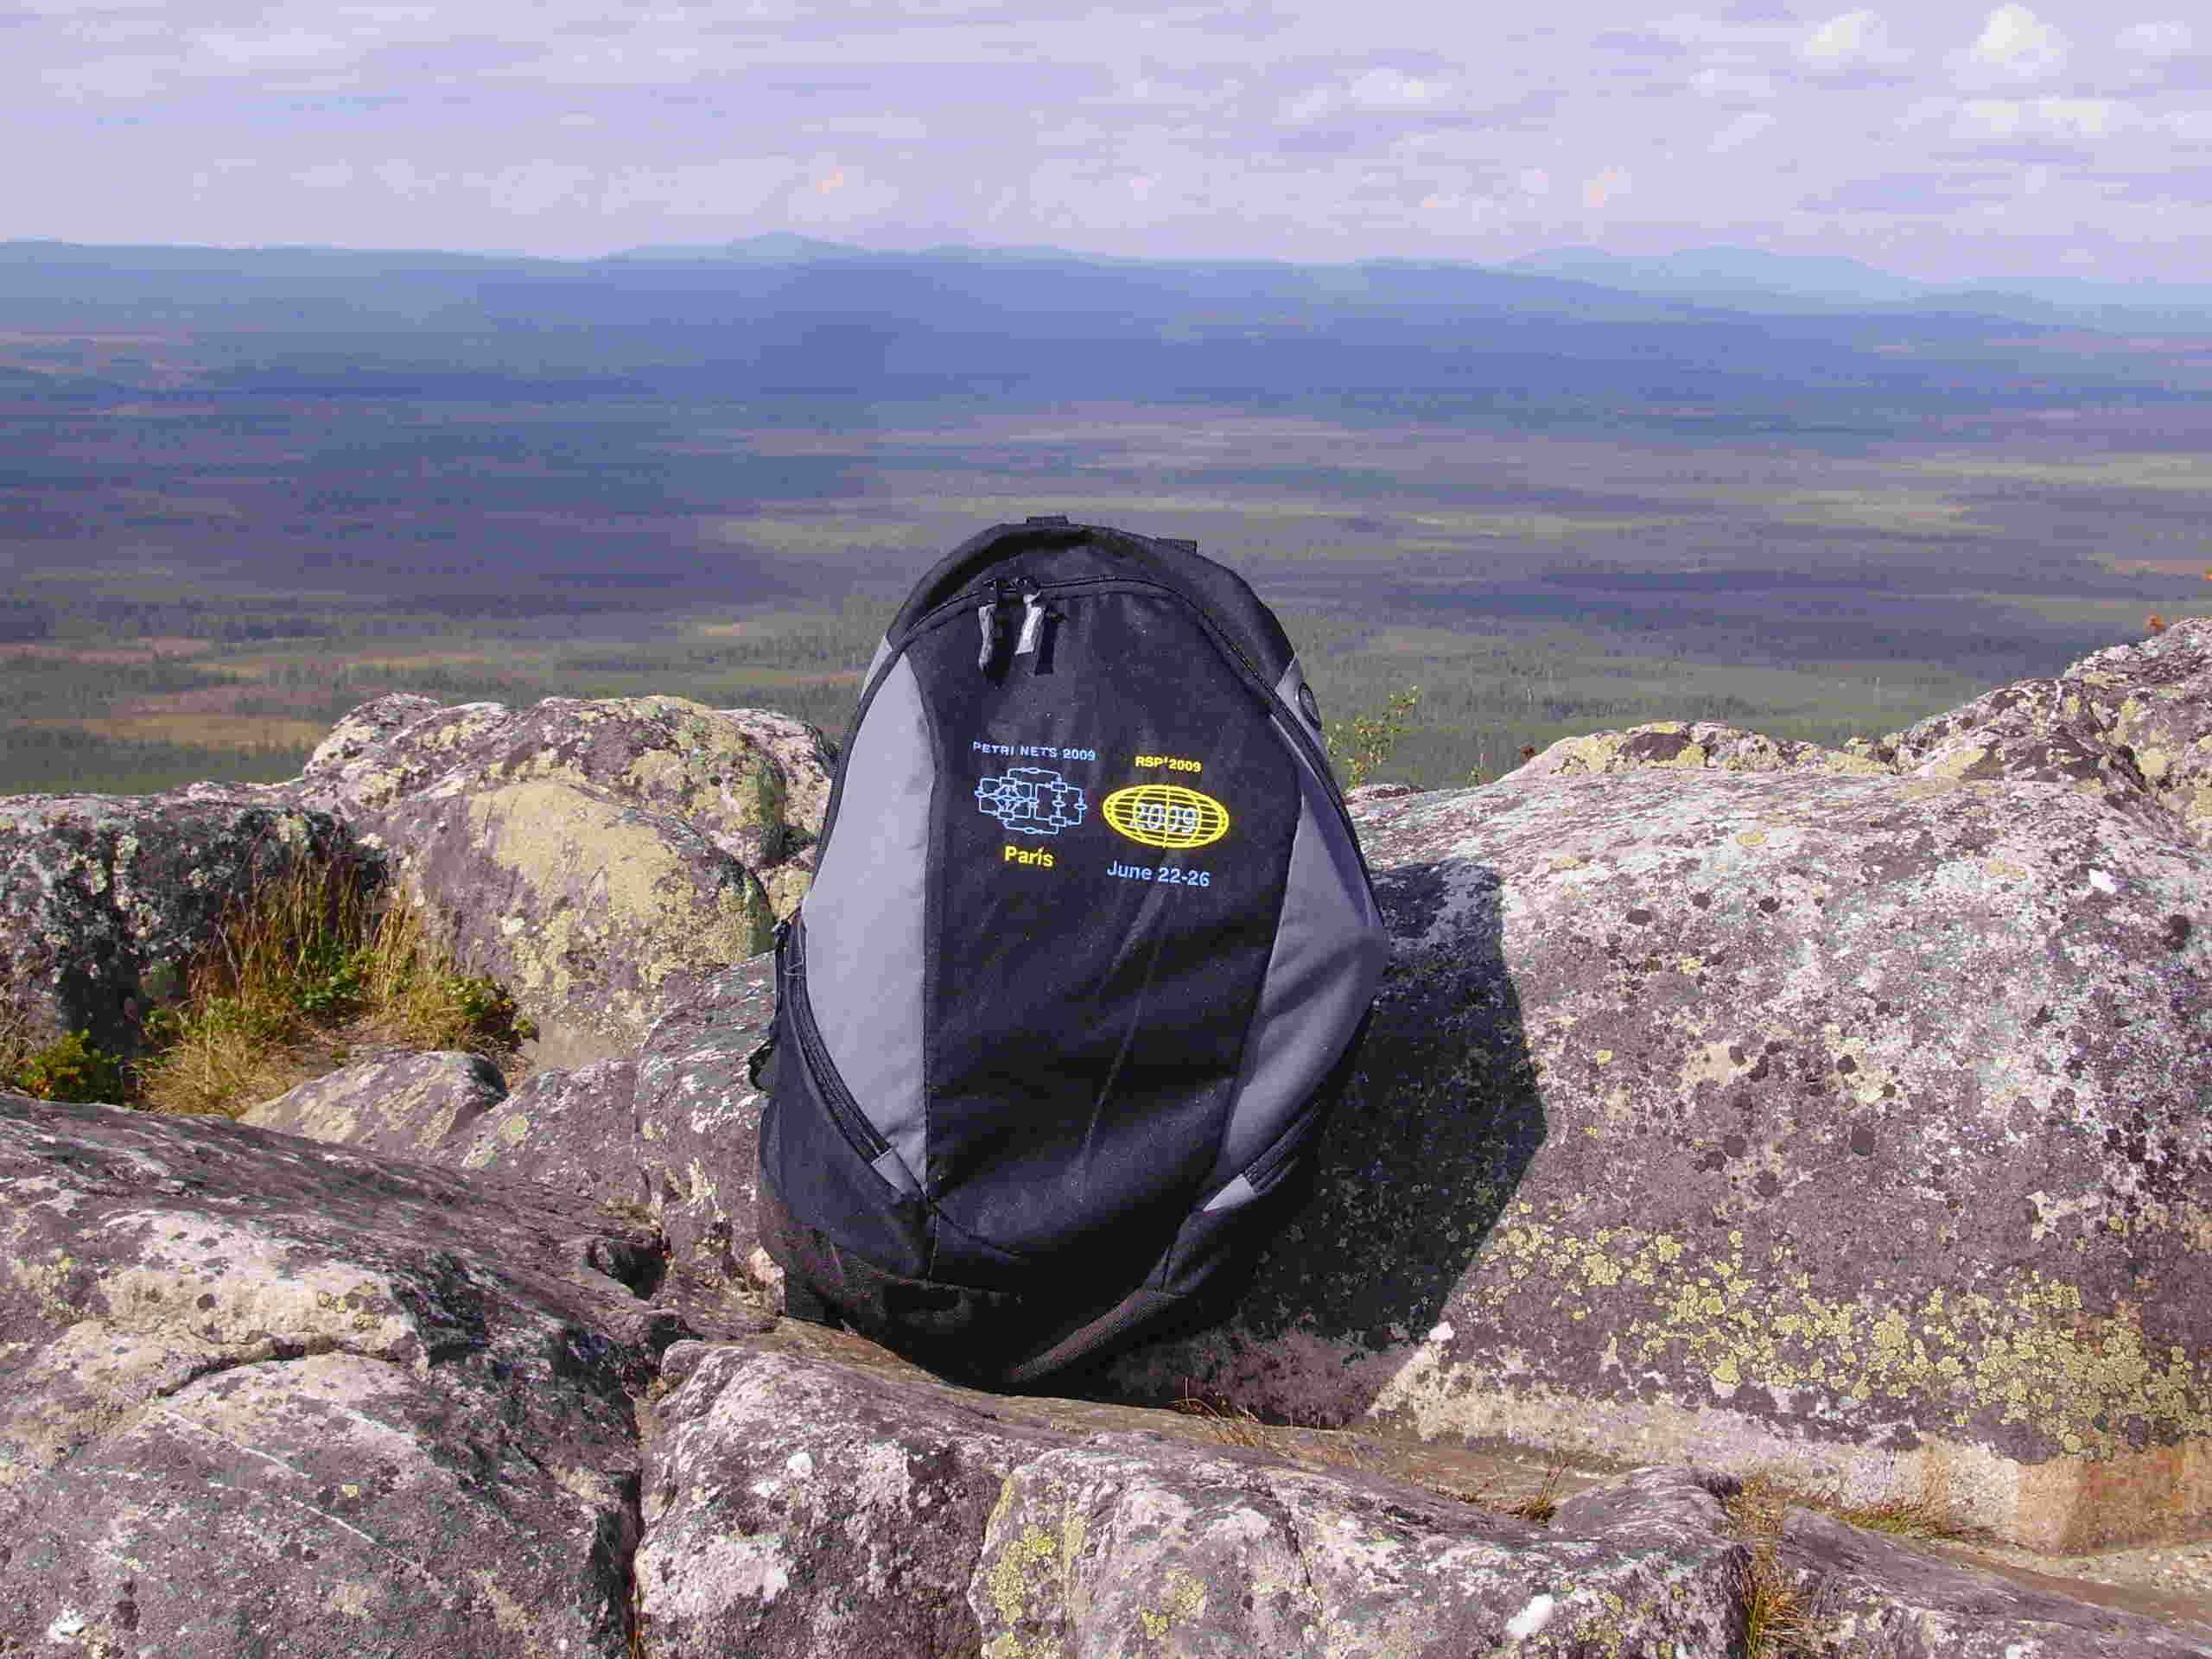 [a photo of Petri net bag in Finnish Lapland]